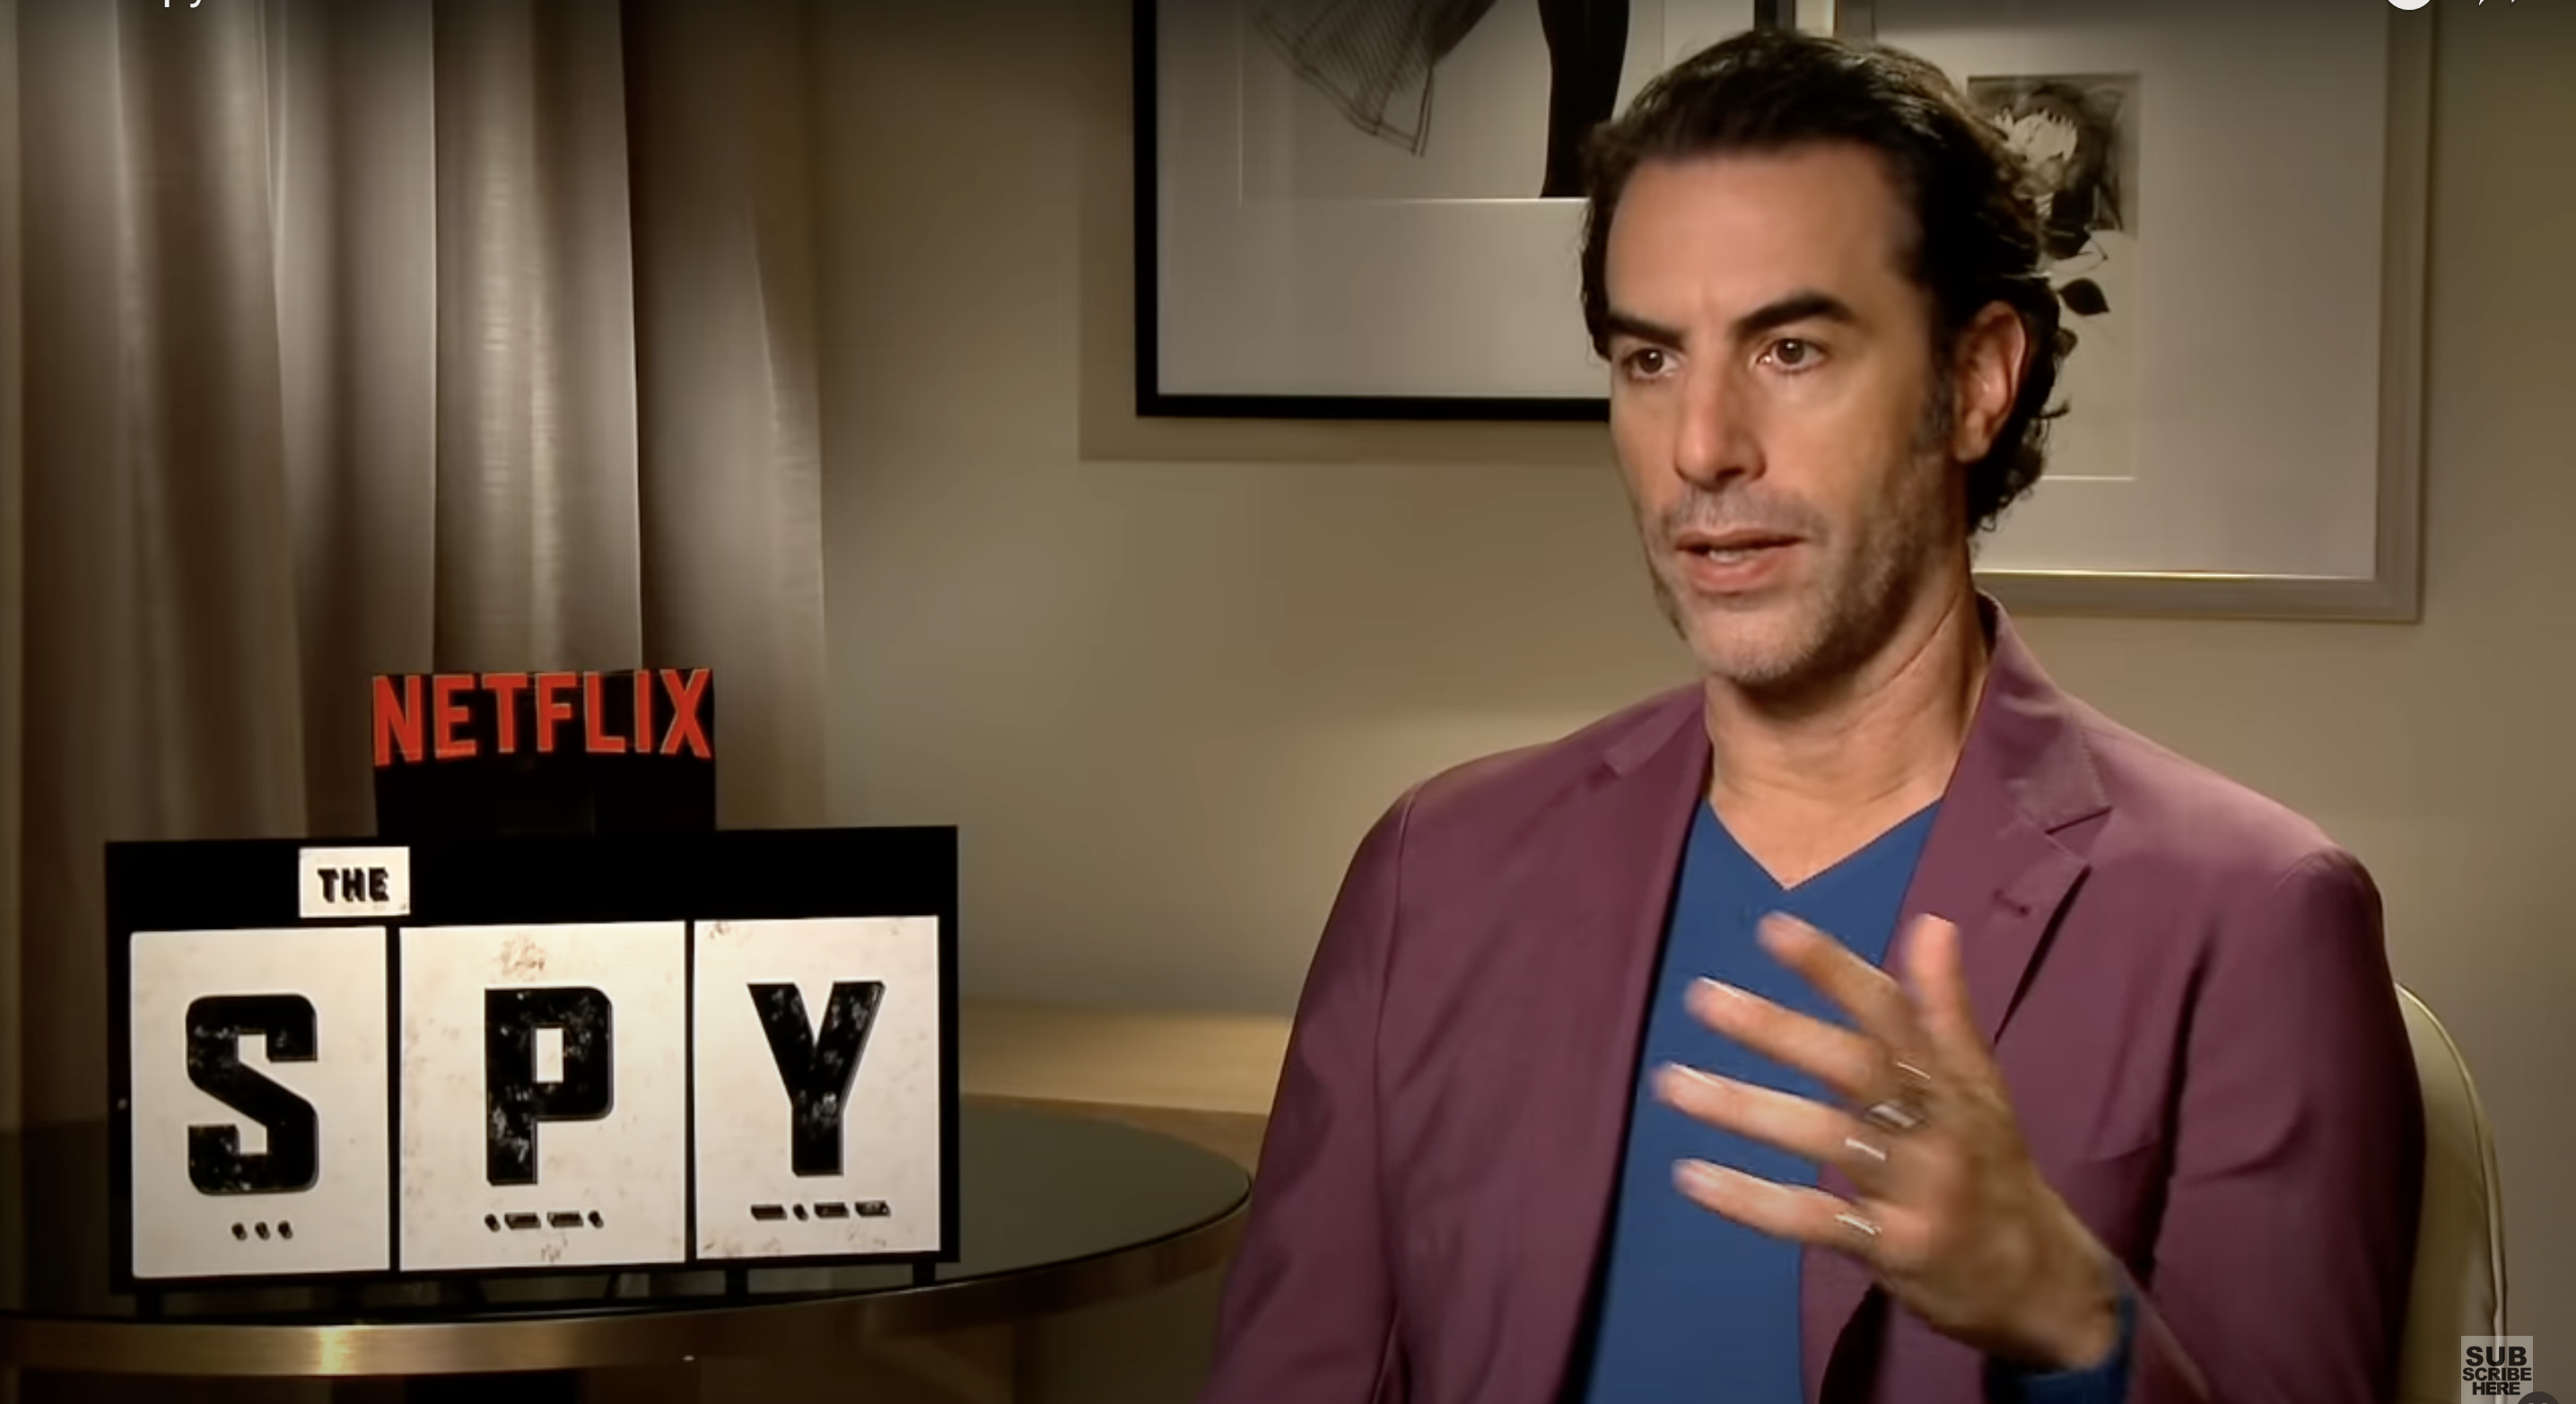 Sacha Baron Cohen sits down with Cinema Magazine to discuss his role as Eli Cohen in the new limited series, "The Spy" on September 3, 2019. Photo Credit: Cinema Magazine